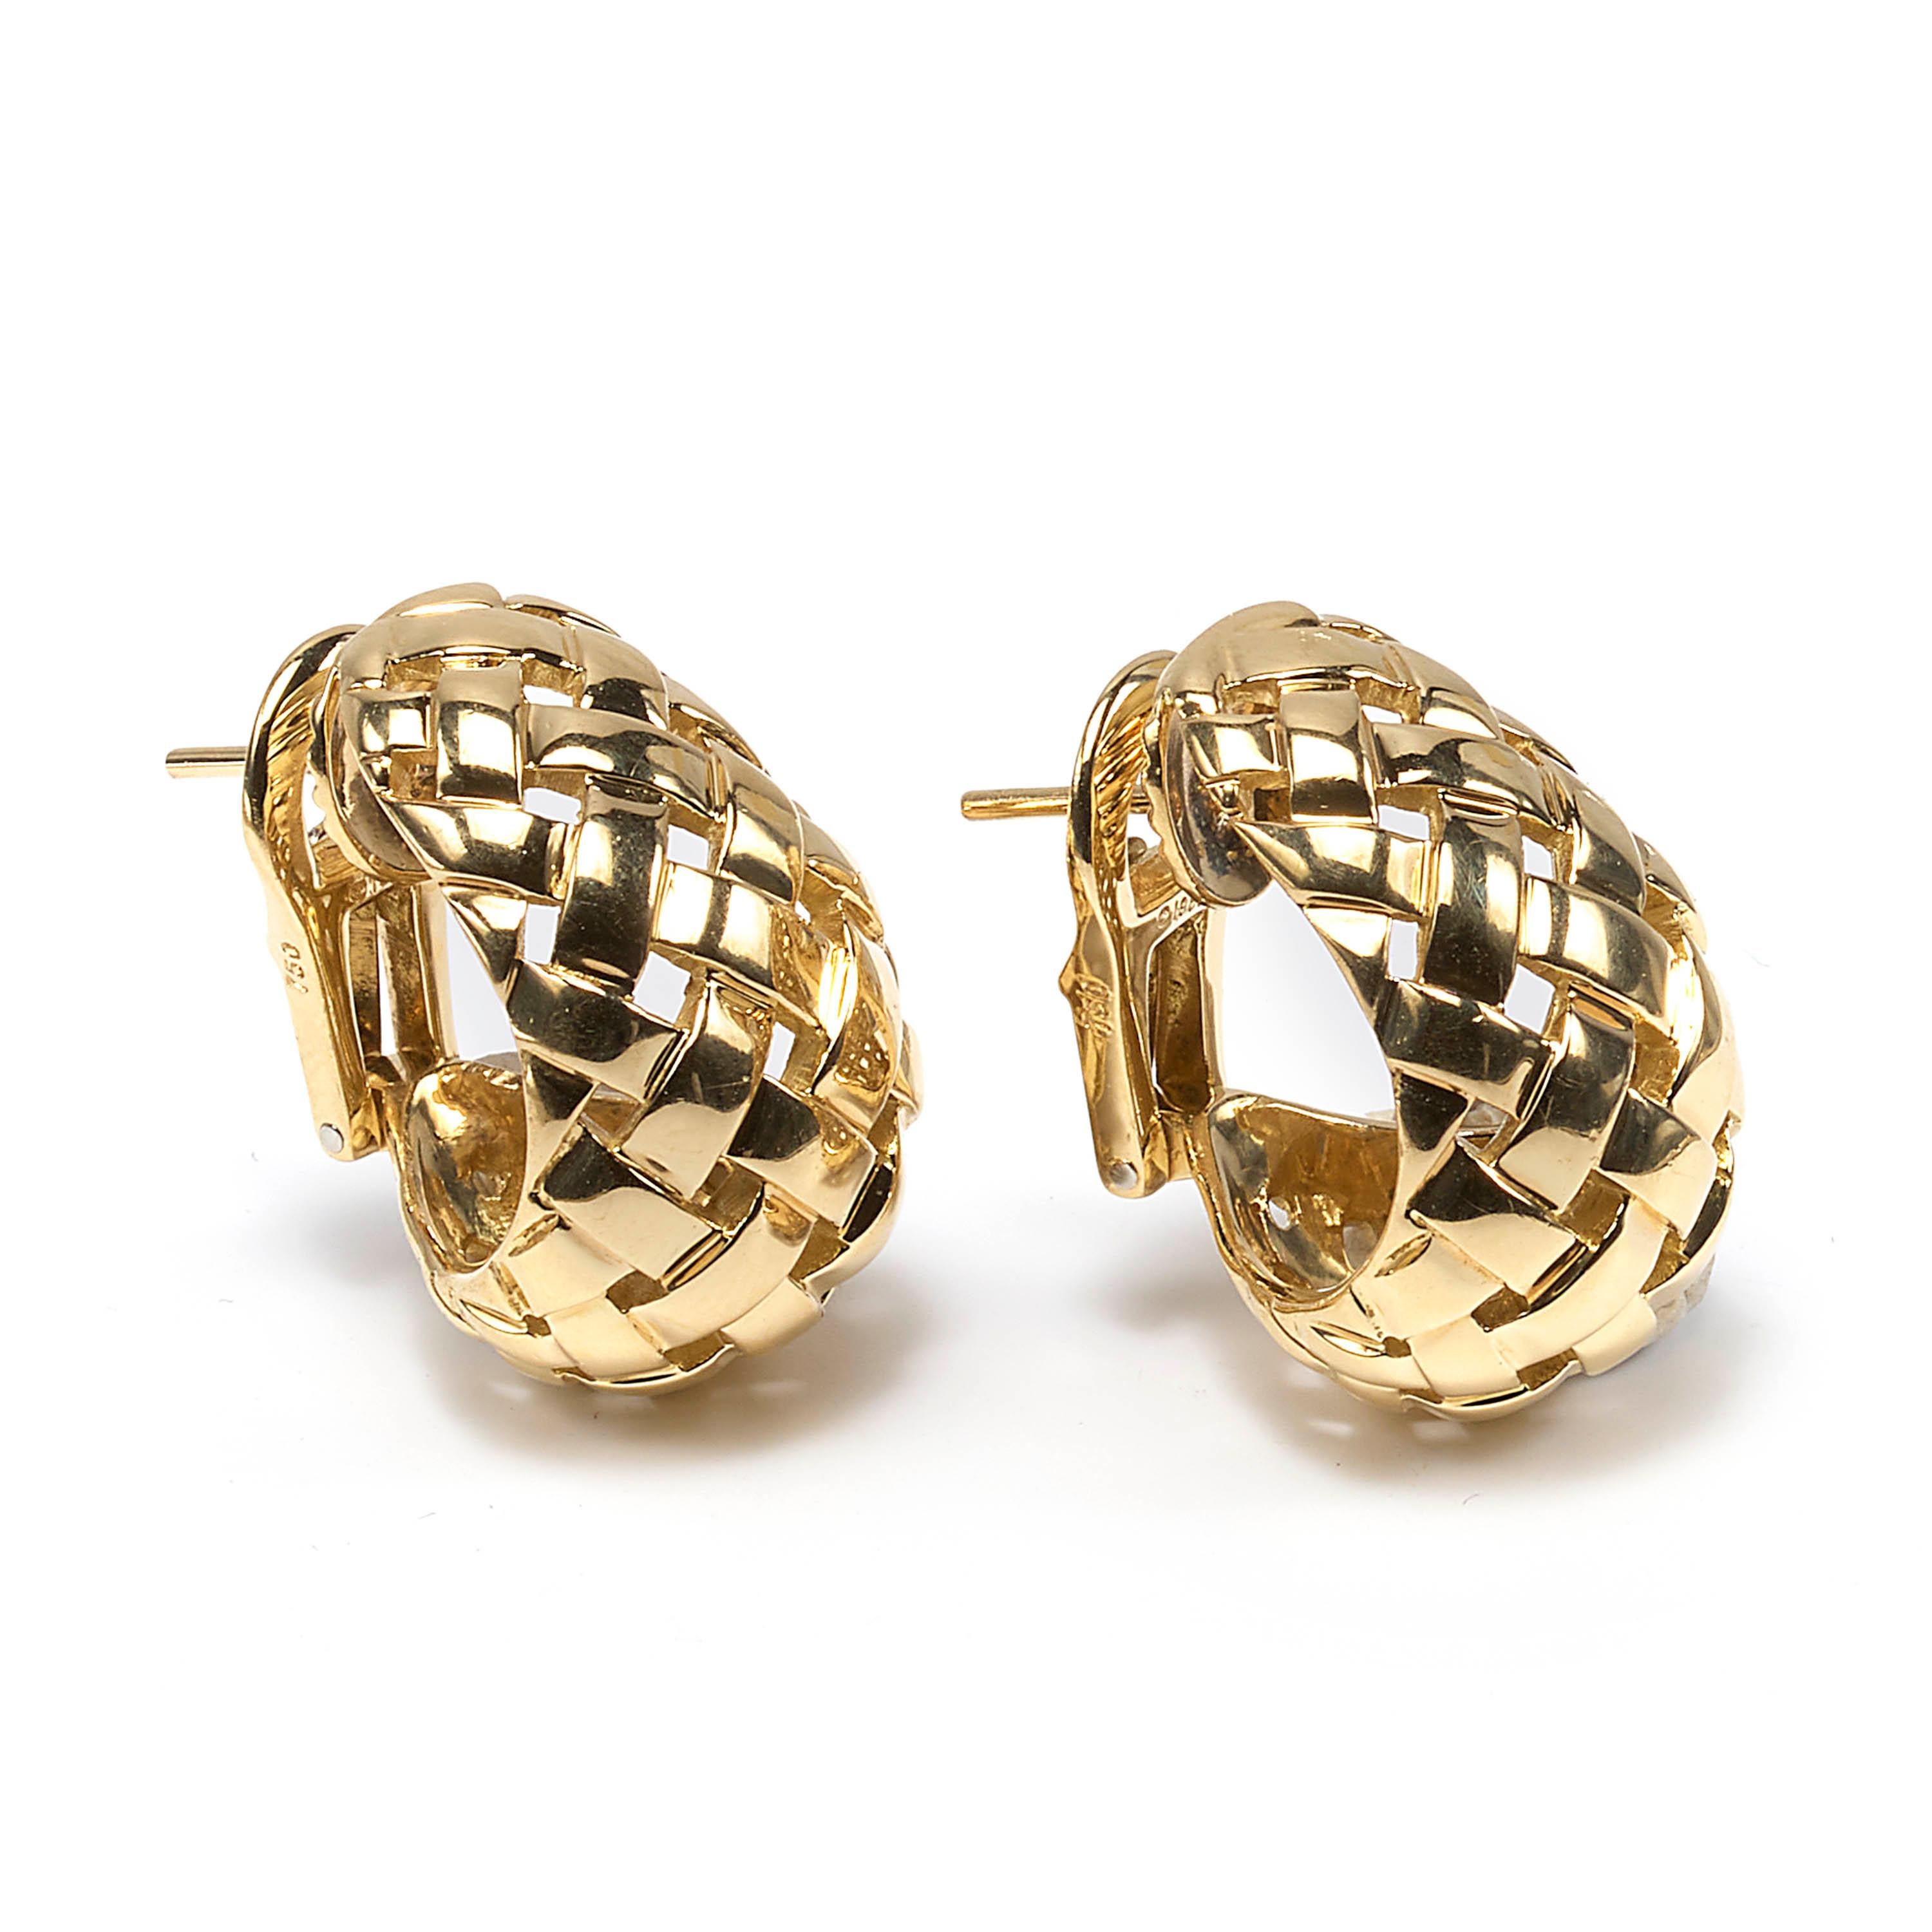 A pair of Tiffany & Co. gold 